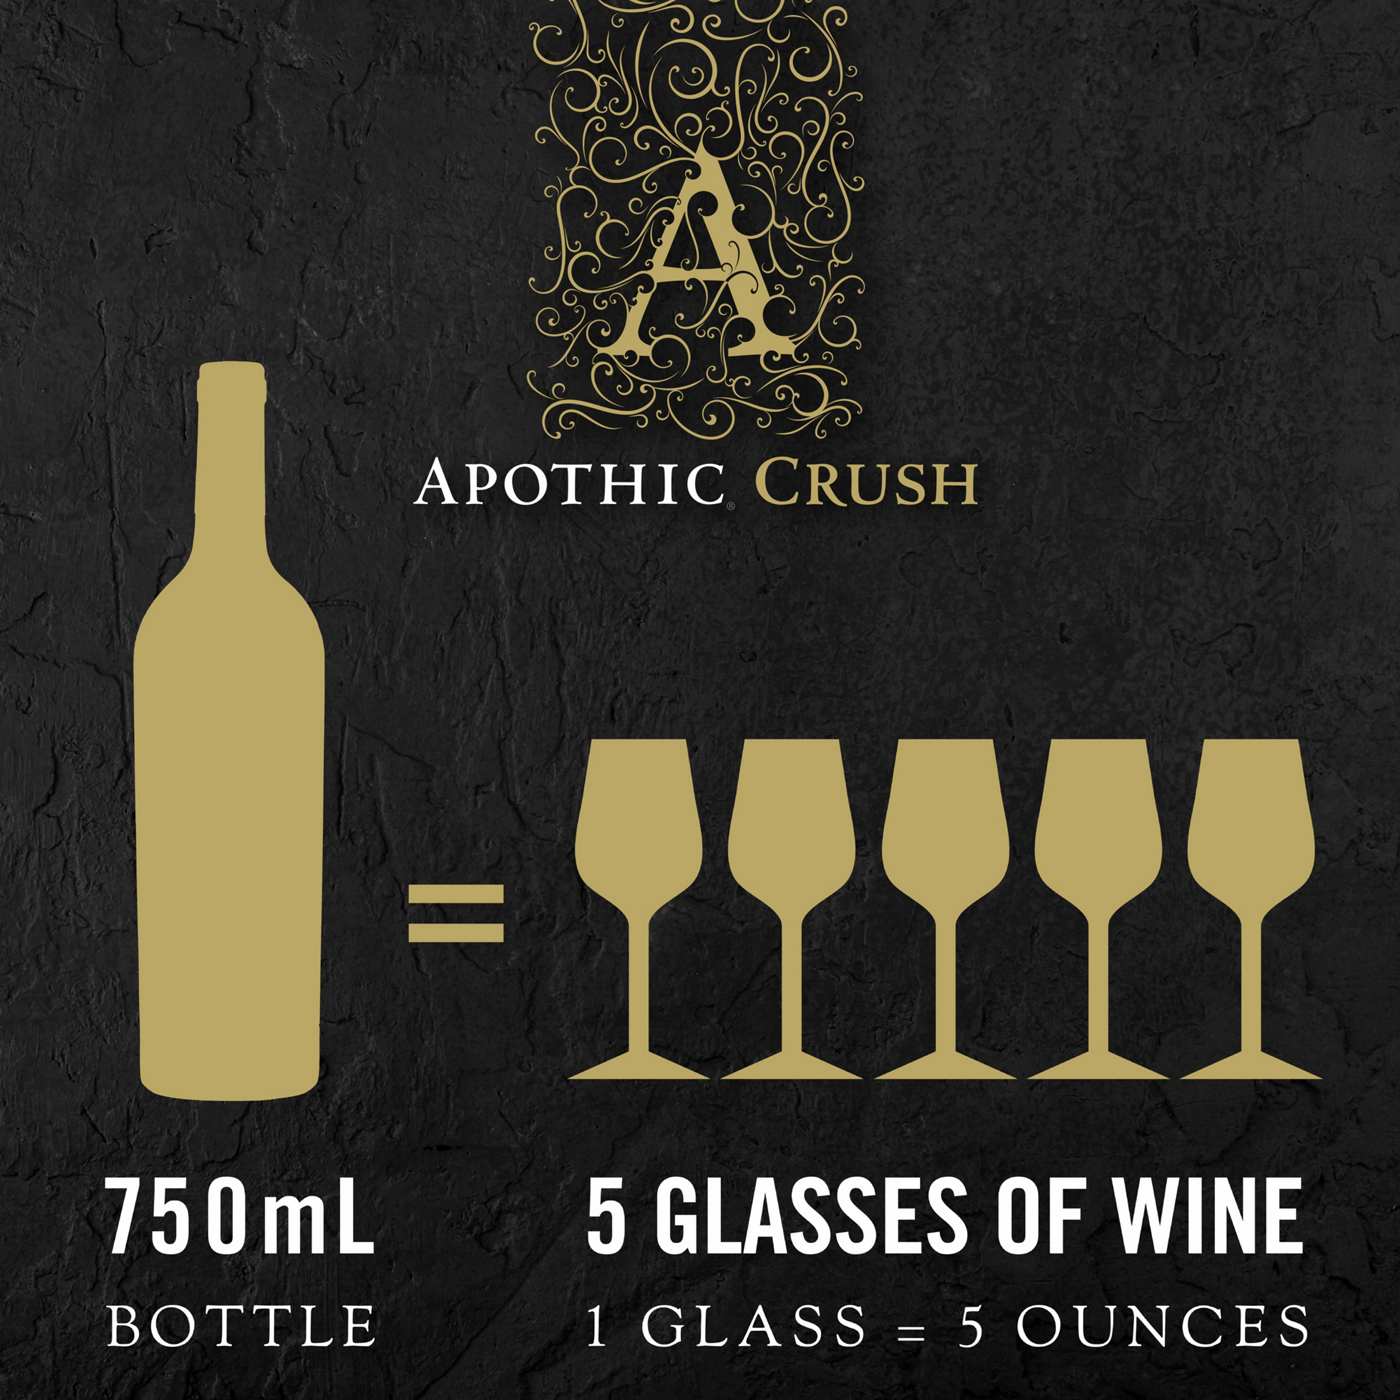 Apothic Crush Red Blend Red Wine 750ml; image 3 of 3